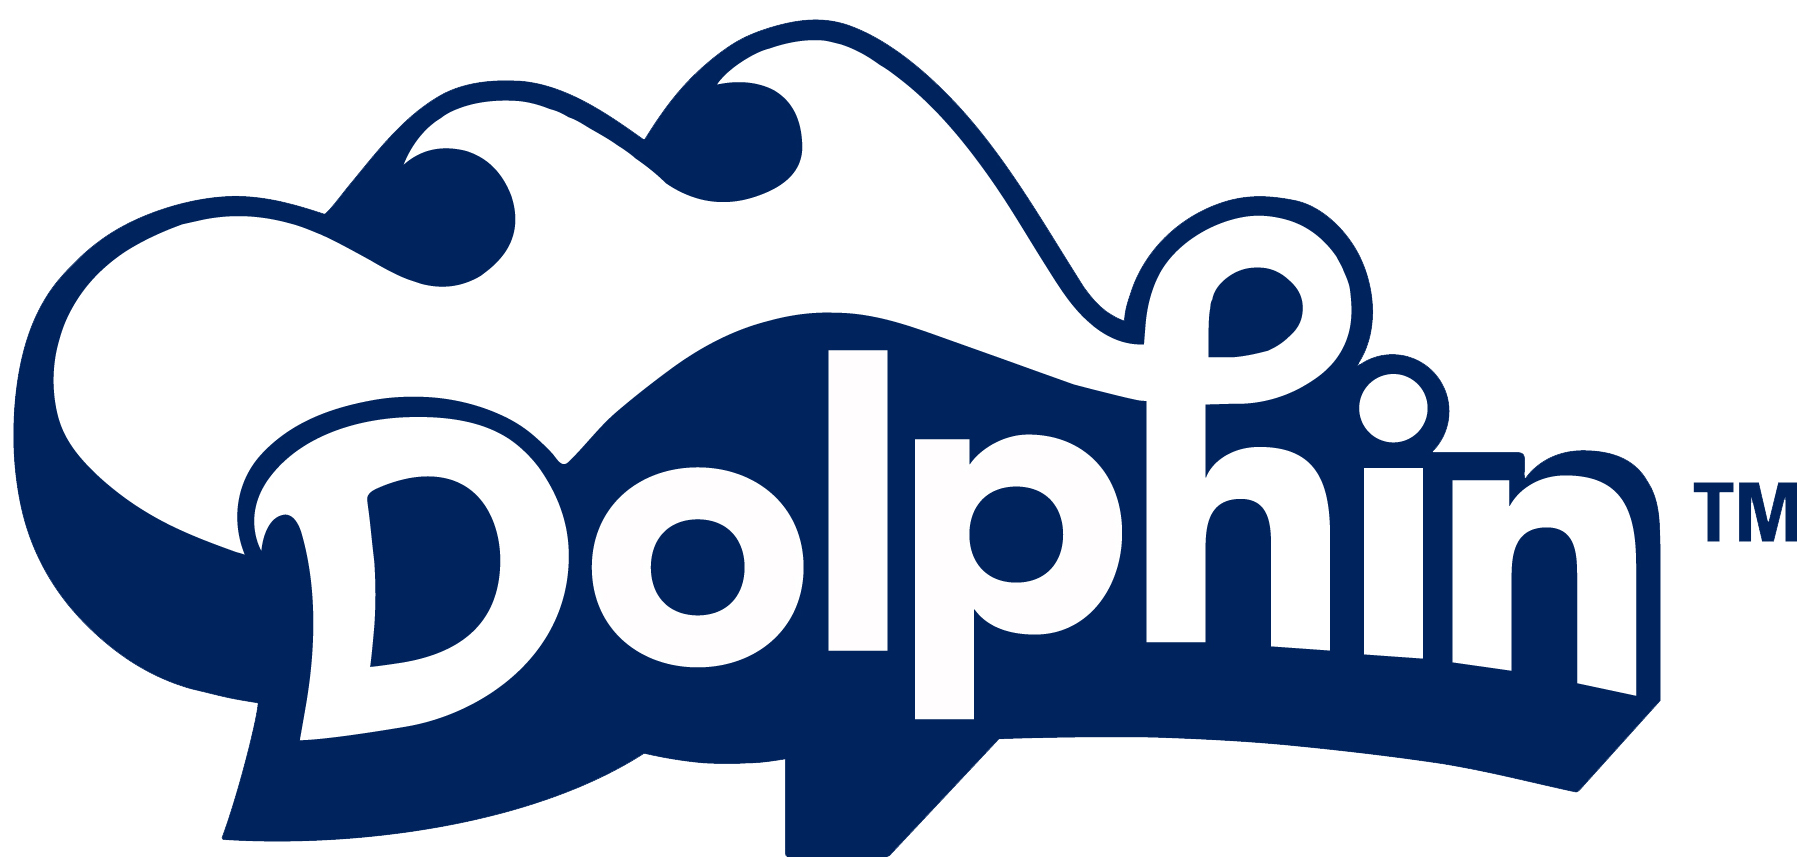 Dolphin Pool Cleaners